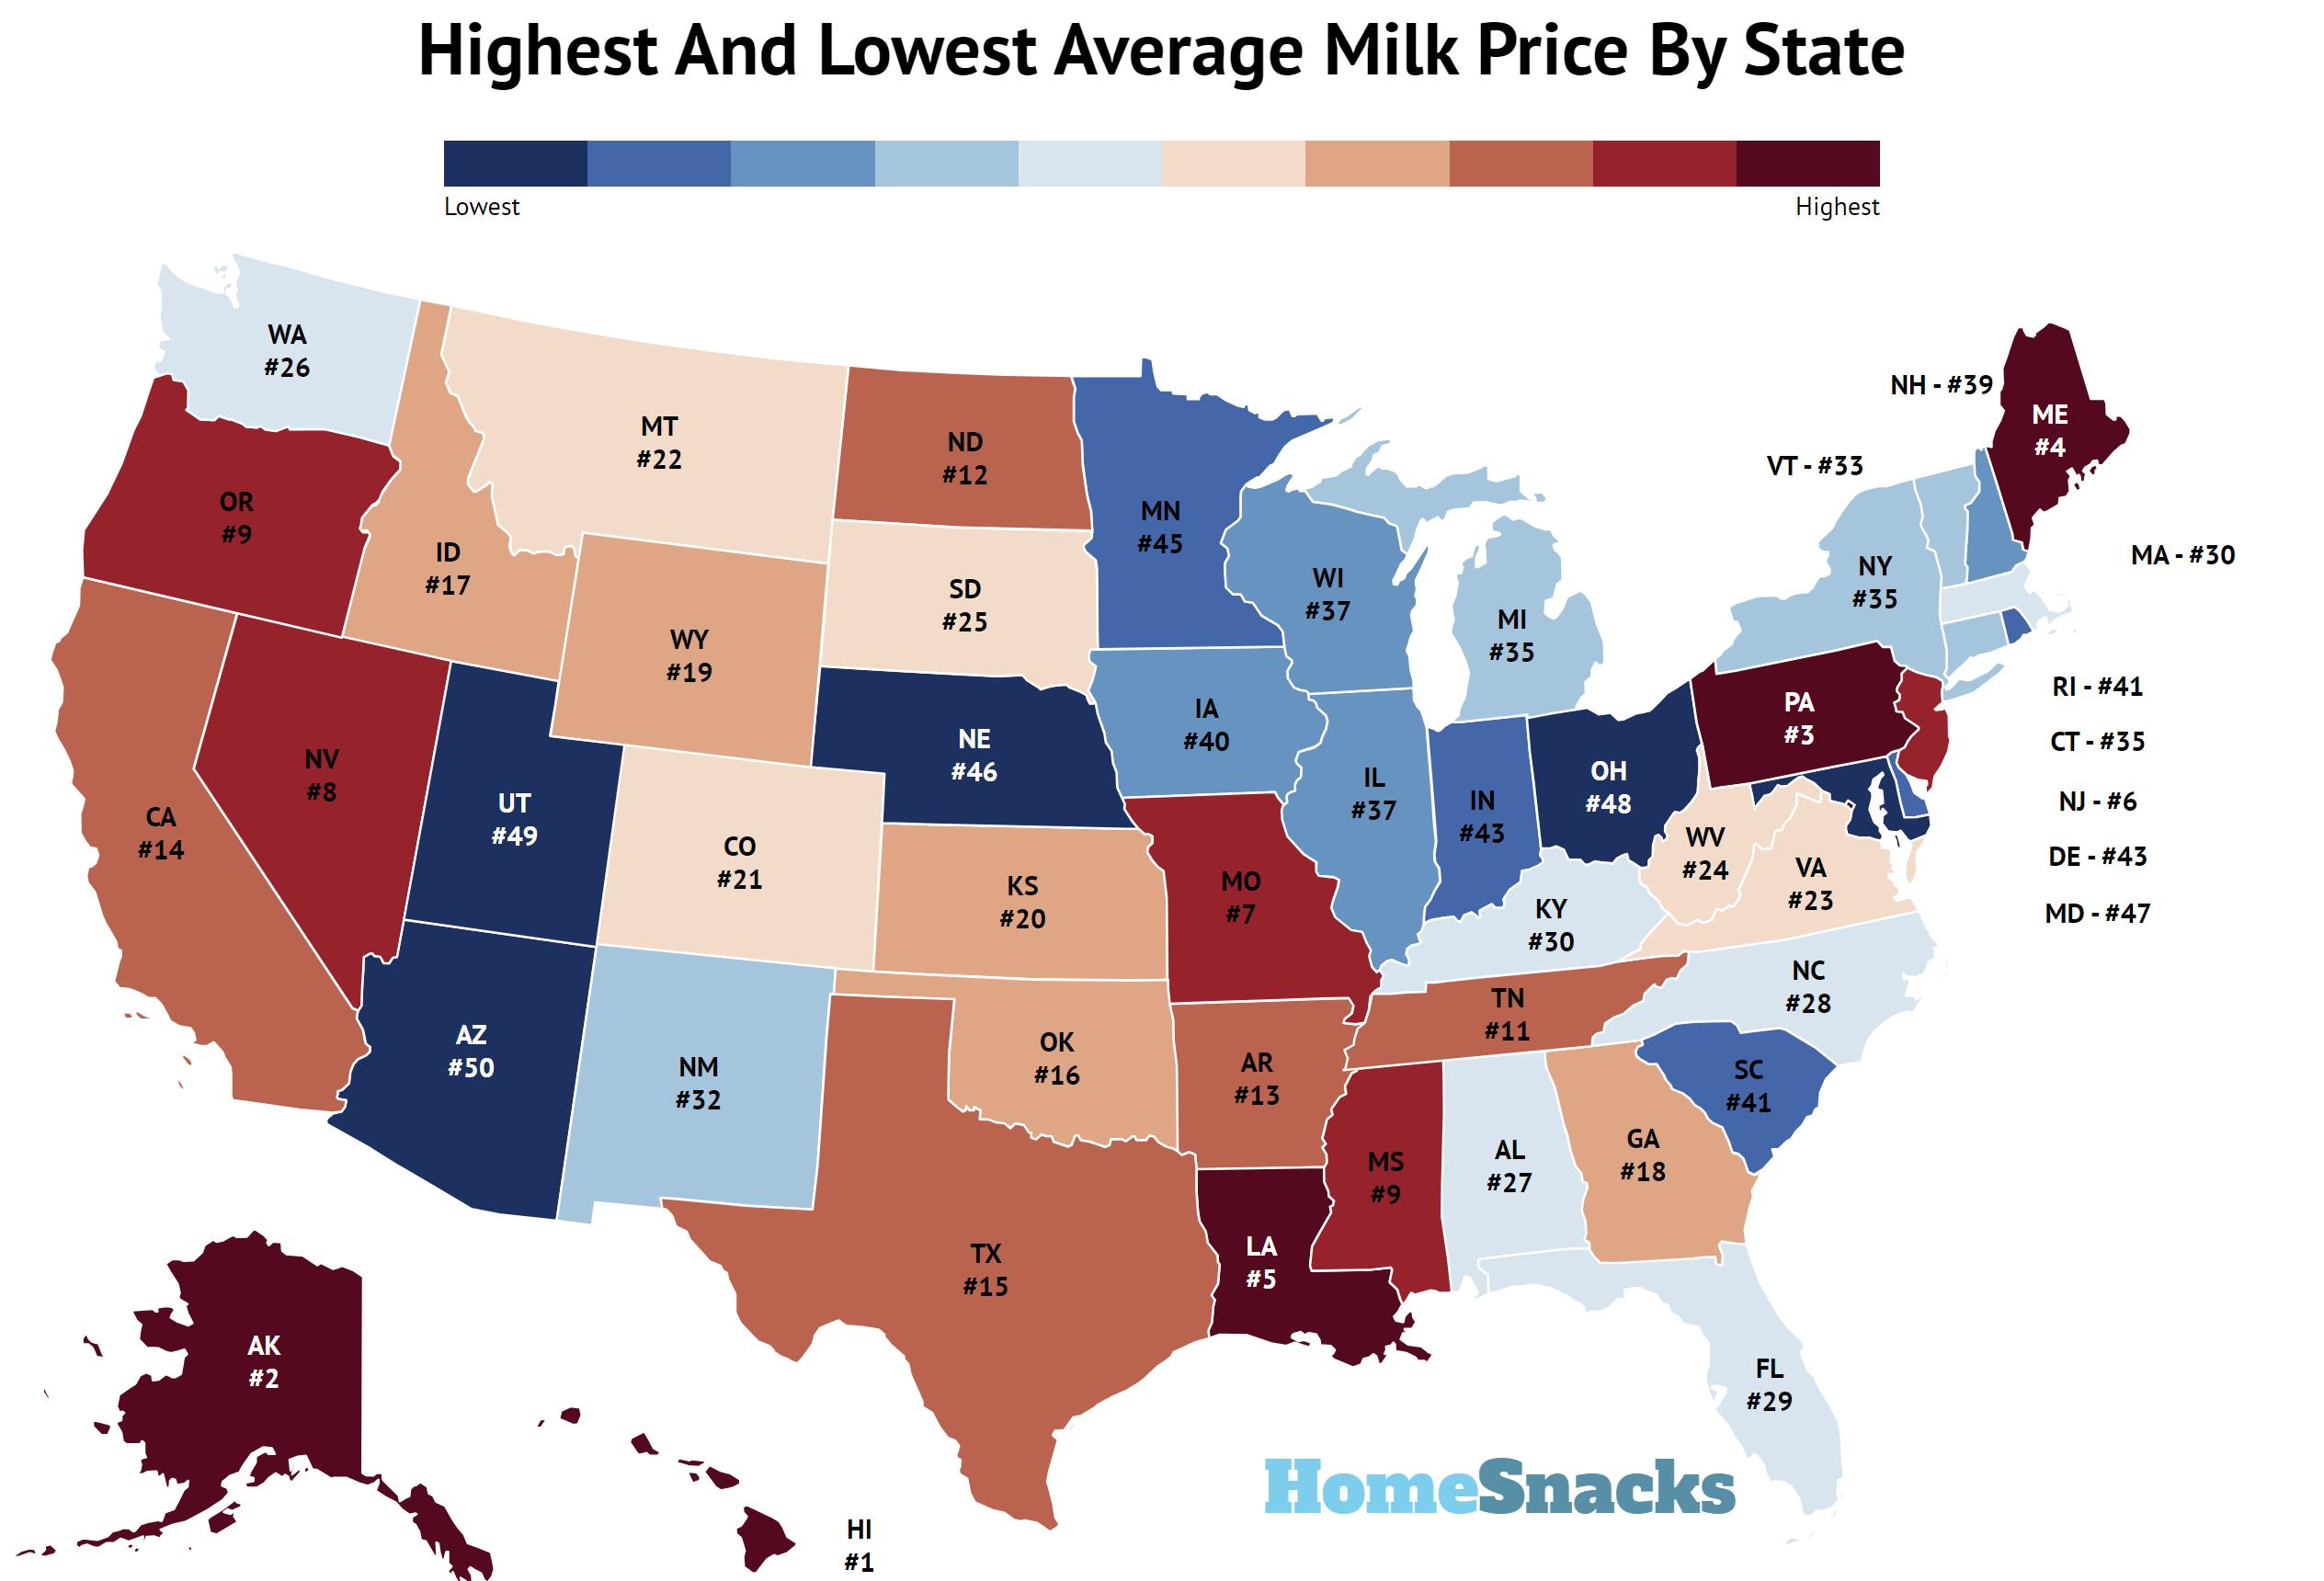 Highest And Lowest Average Milk Price By State